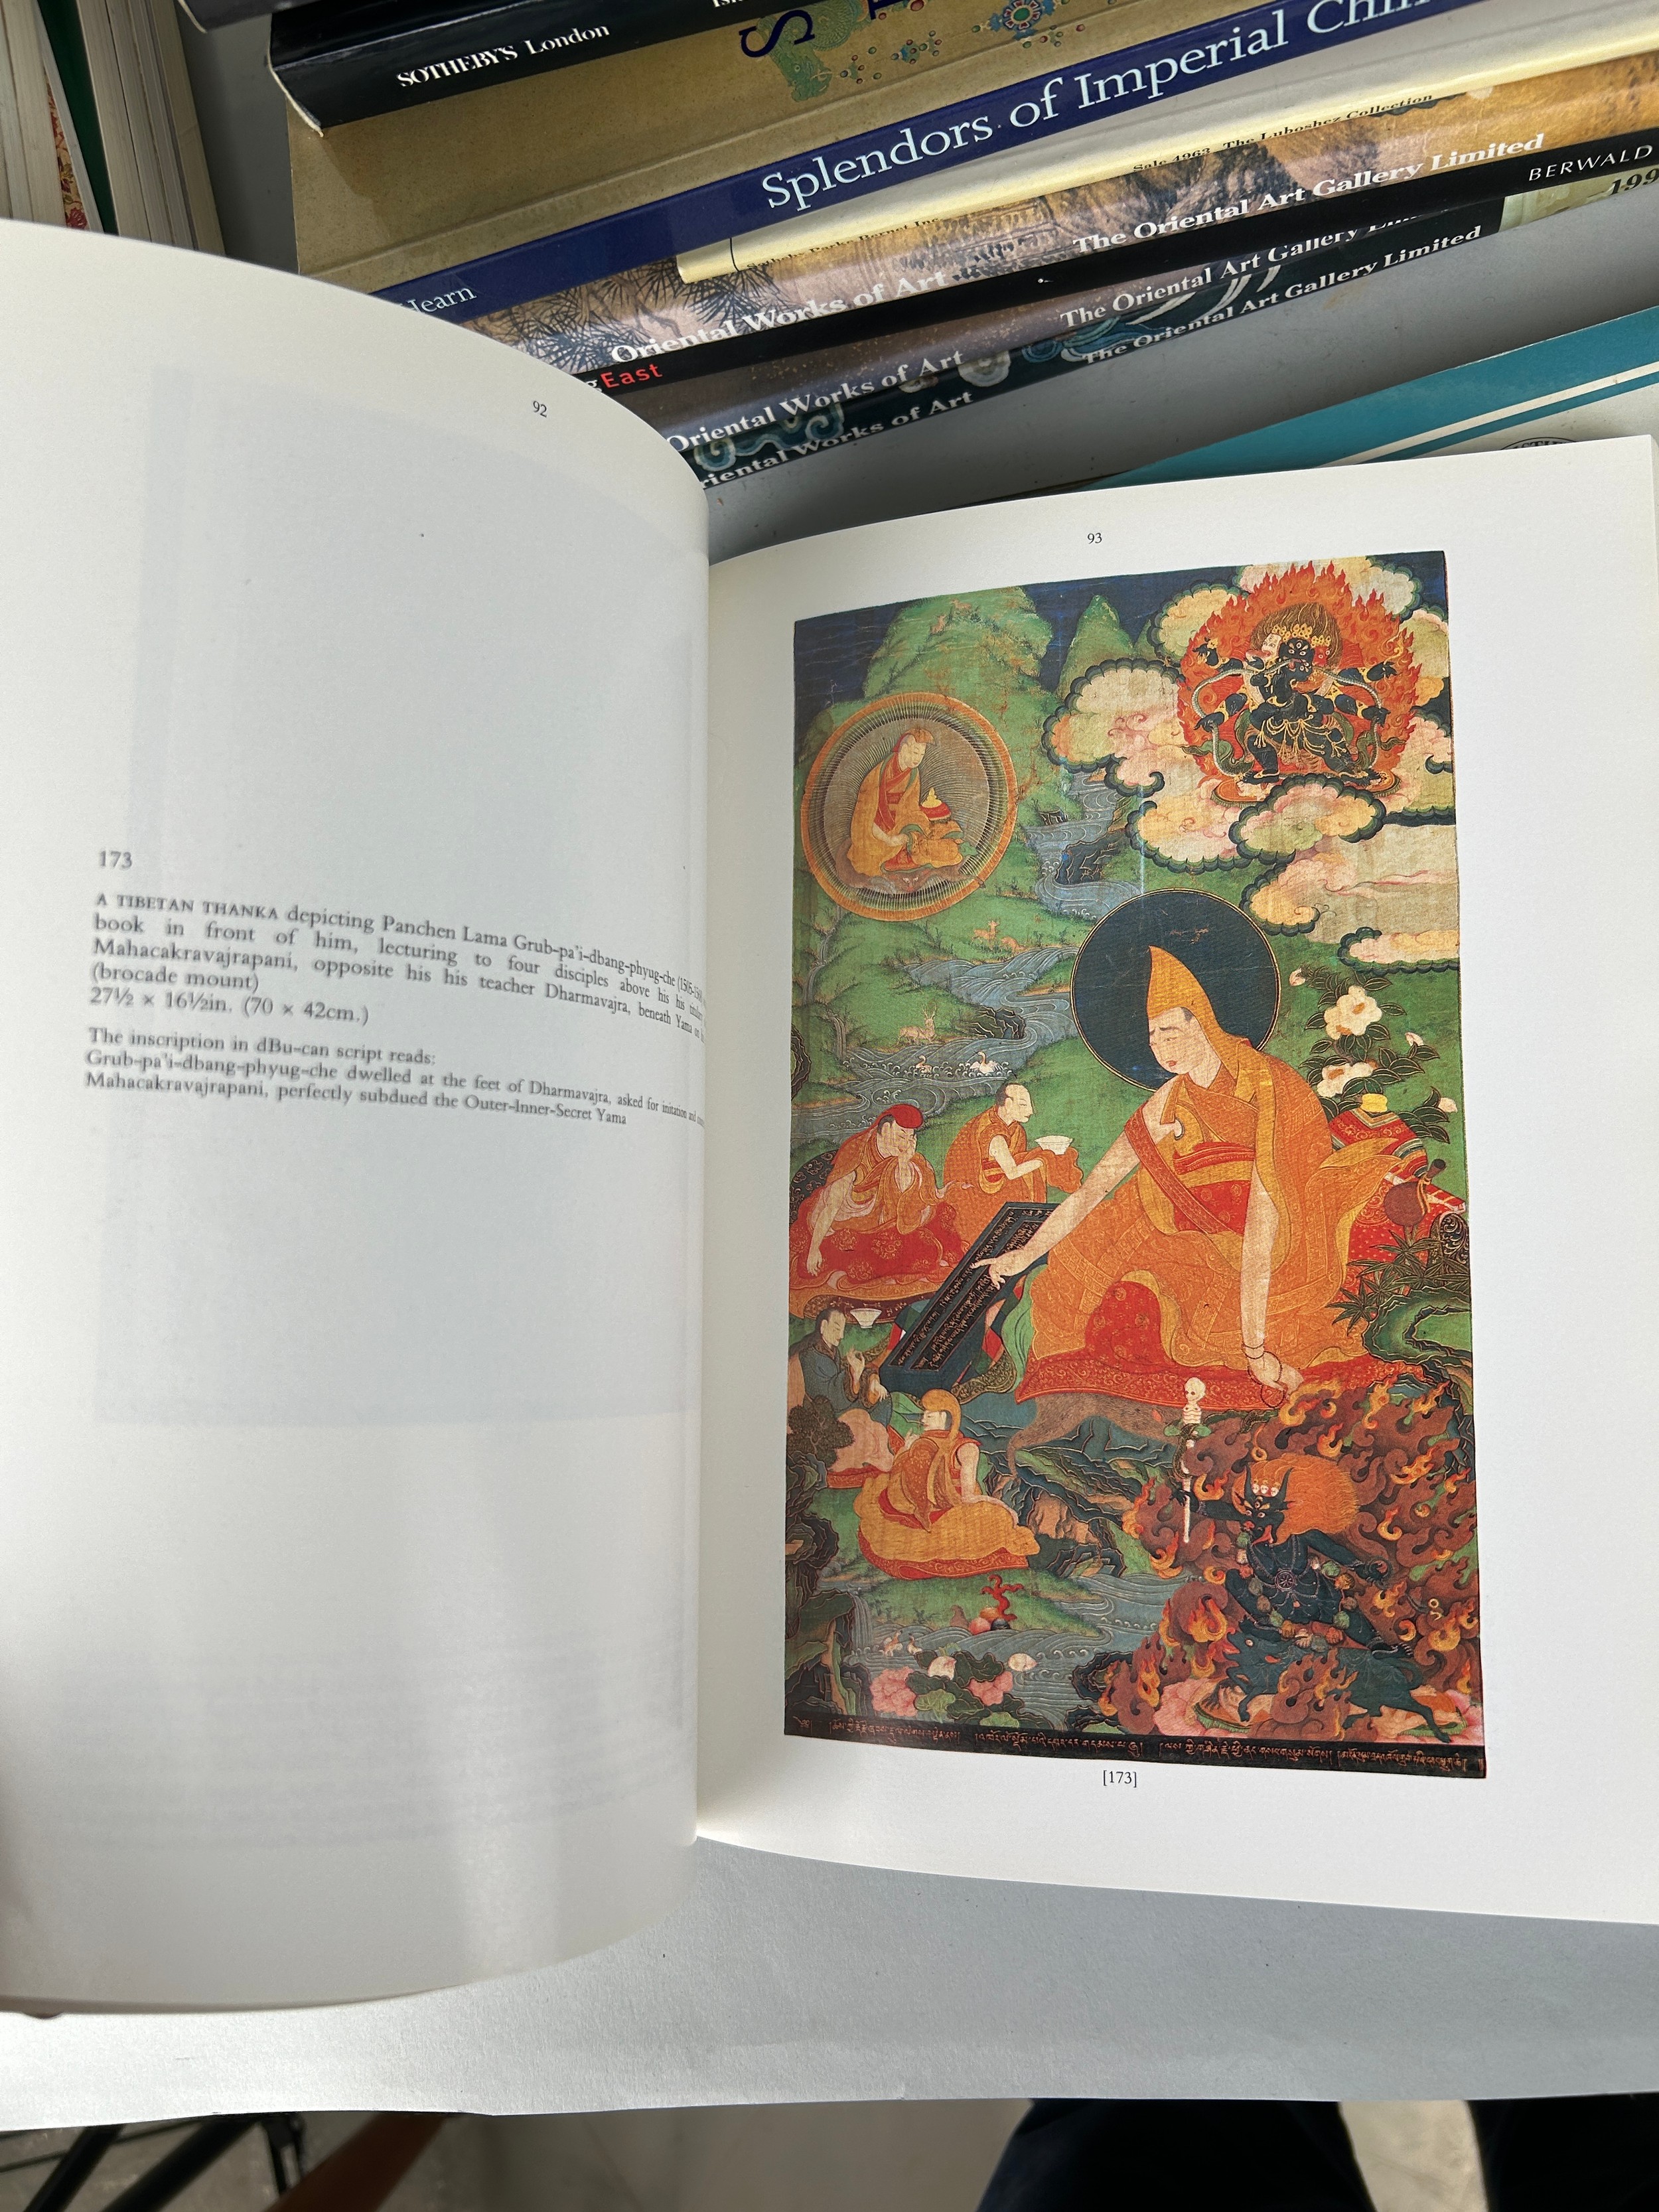 A LARGE COLLECTION OF ASIAN ART CATALOGUES FROM SOTHEBY'S, CHRISTIES, SPINK AND OTHER AUCTION HOUSES - Image 8 of 13